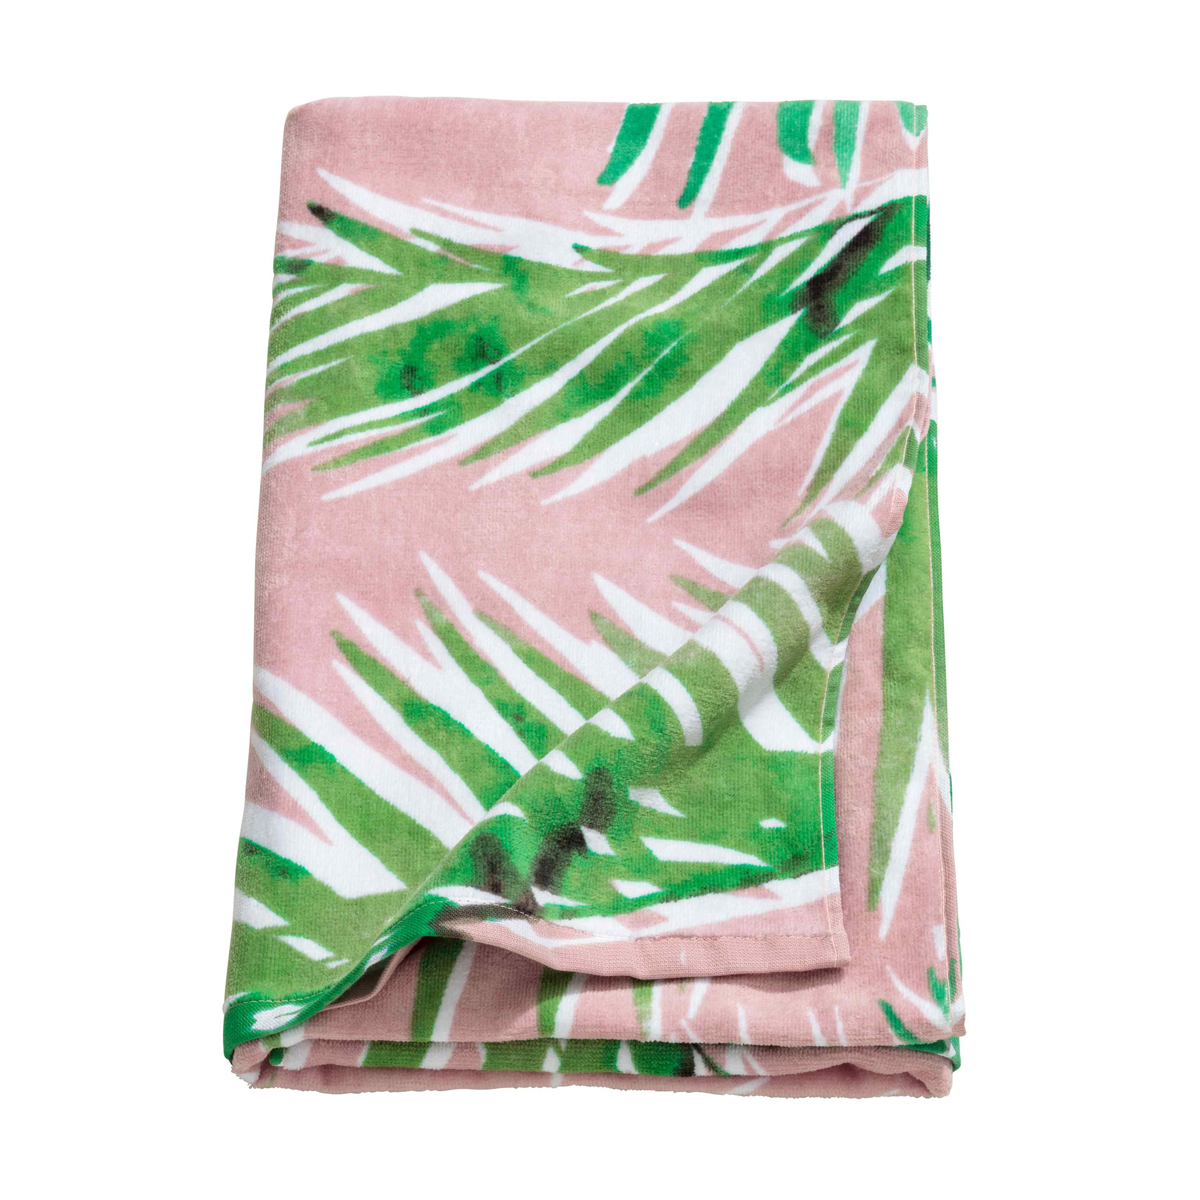 Heading to Southerndown, Swansea or somewhere sunny further afield? Don't forget to pack a beach towel! Pink palm print towel, £12.99, H&M